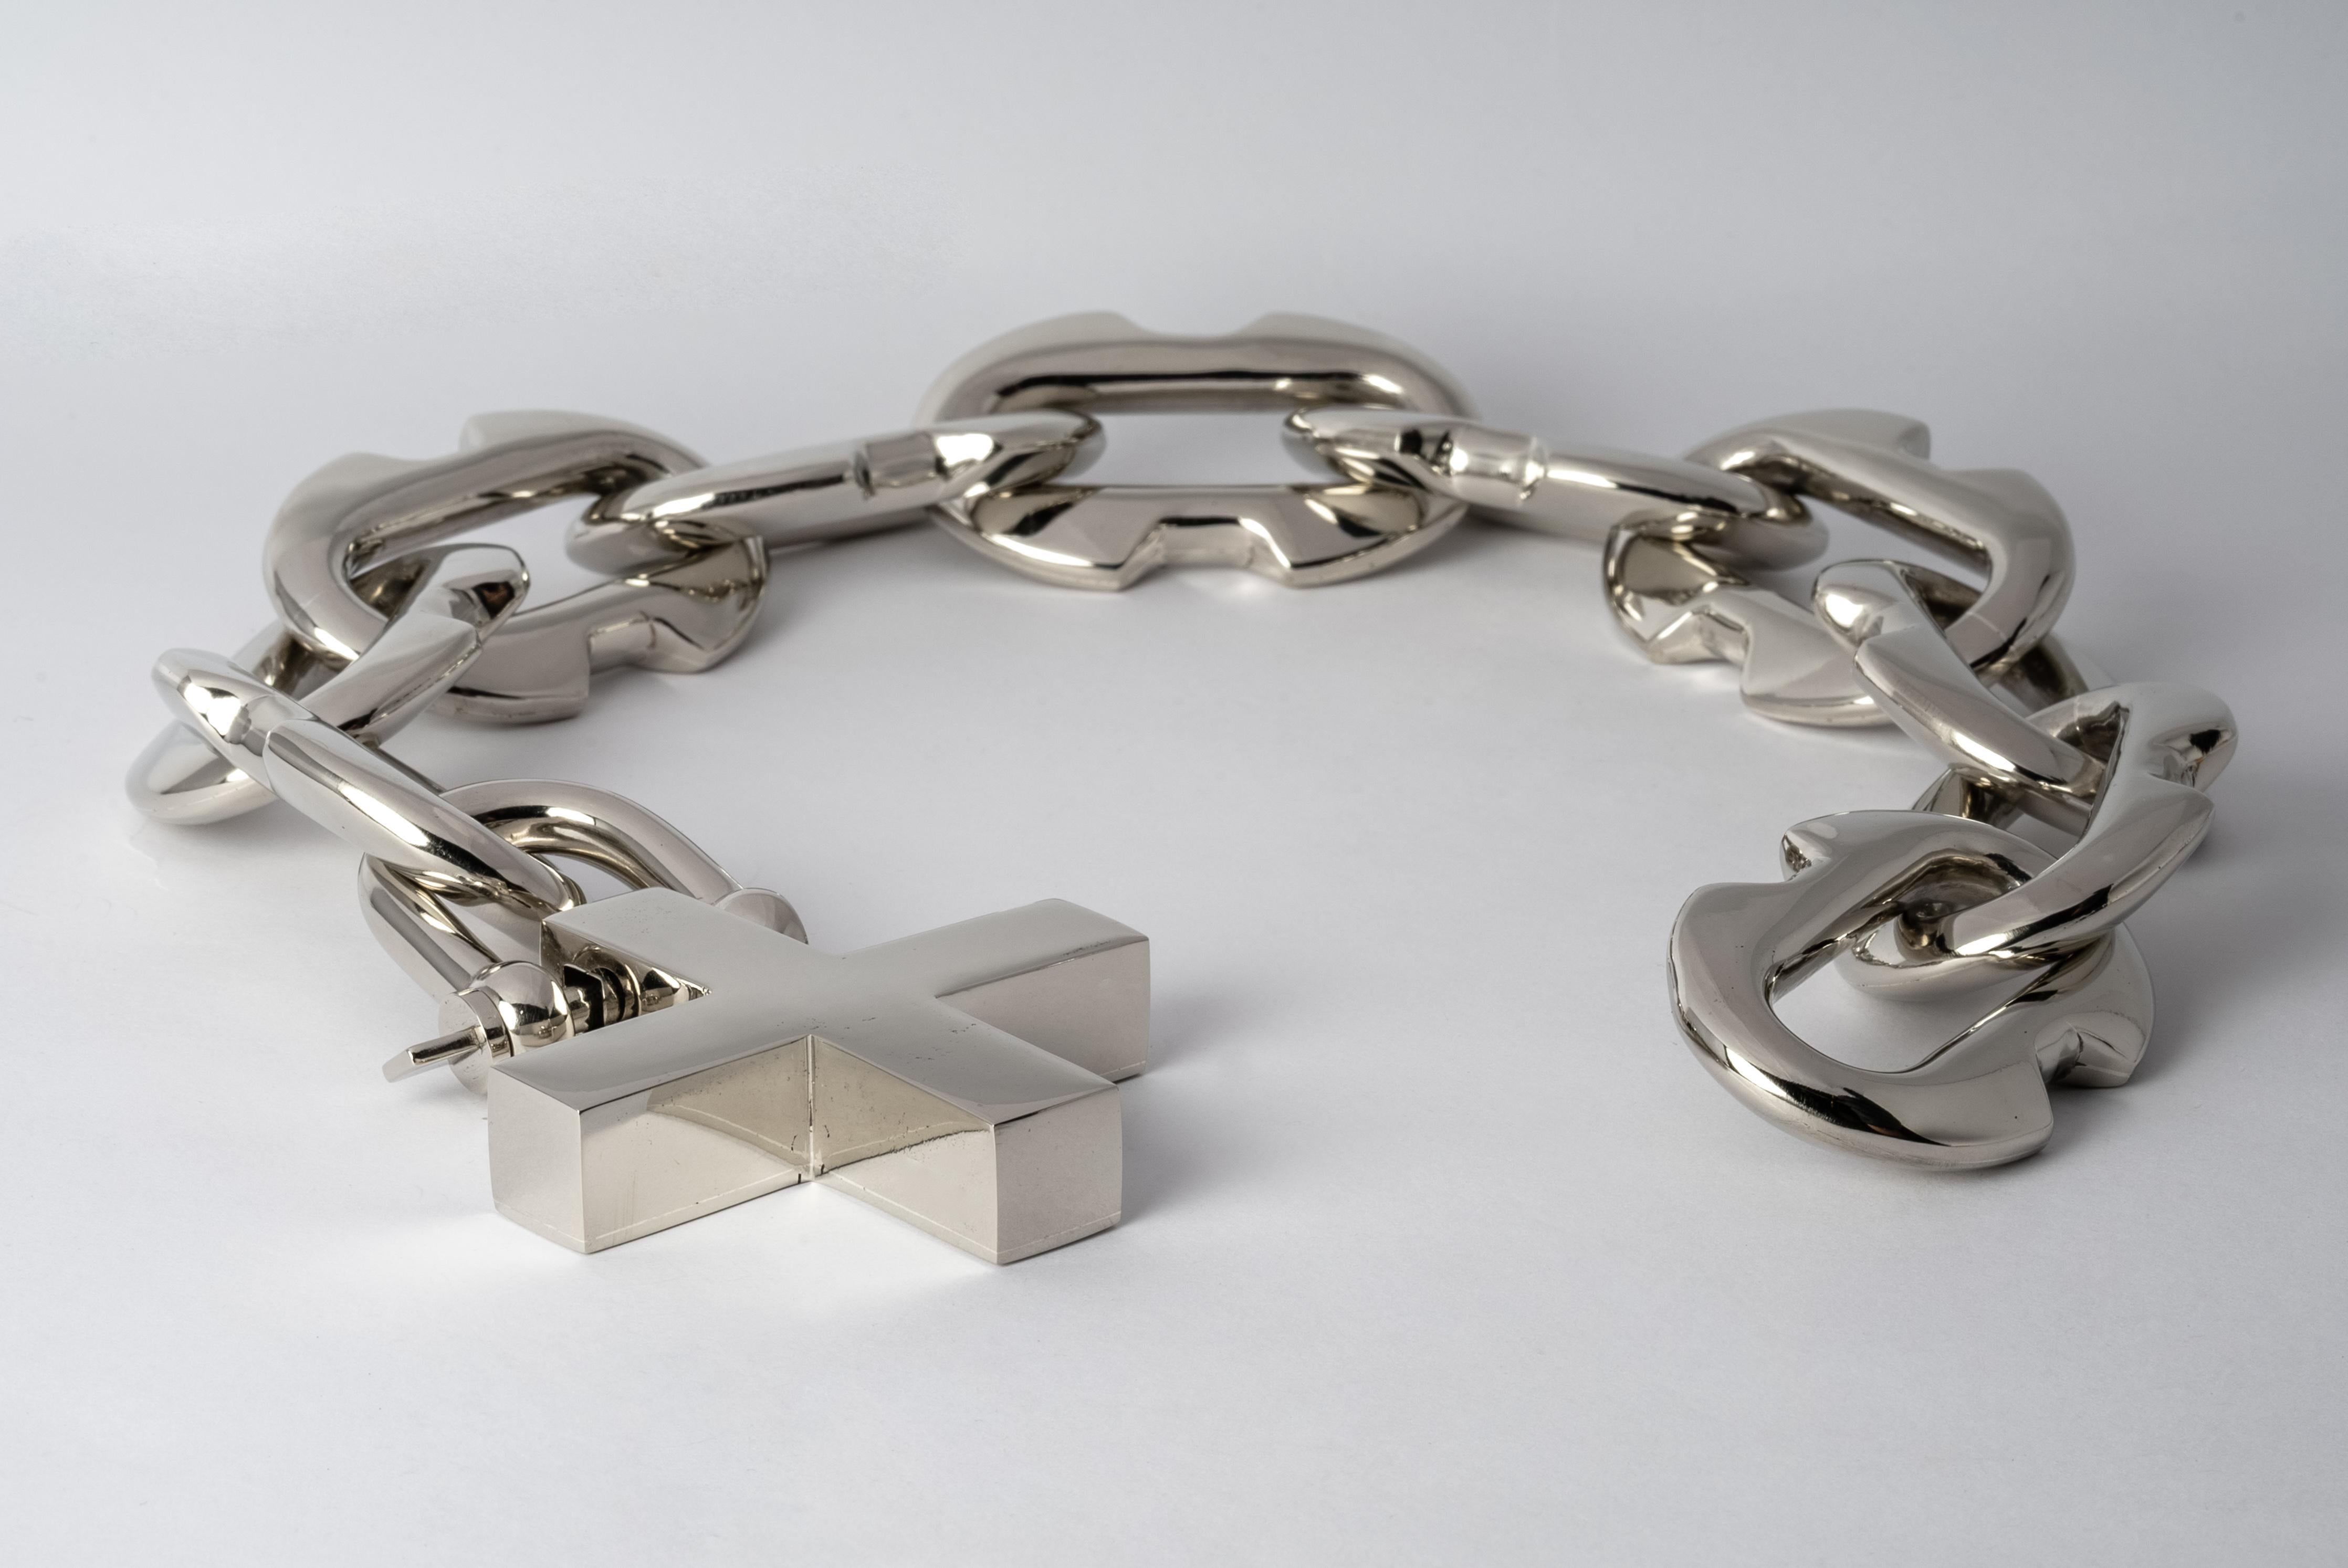 Chain necklace in bronze with polized white bronze. 
The Charm System is an interrelated group of products that can be mixed and matched or worn individually.
Chain link size (L × H): 70 mm × 43 mm
Chain length: 550 mm
Plus height: 72 mm
U-bolt